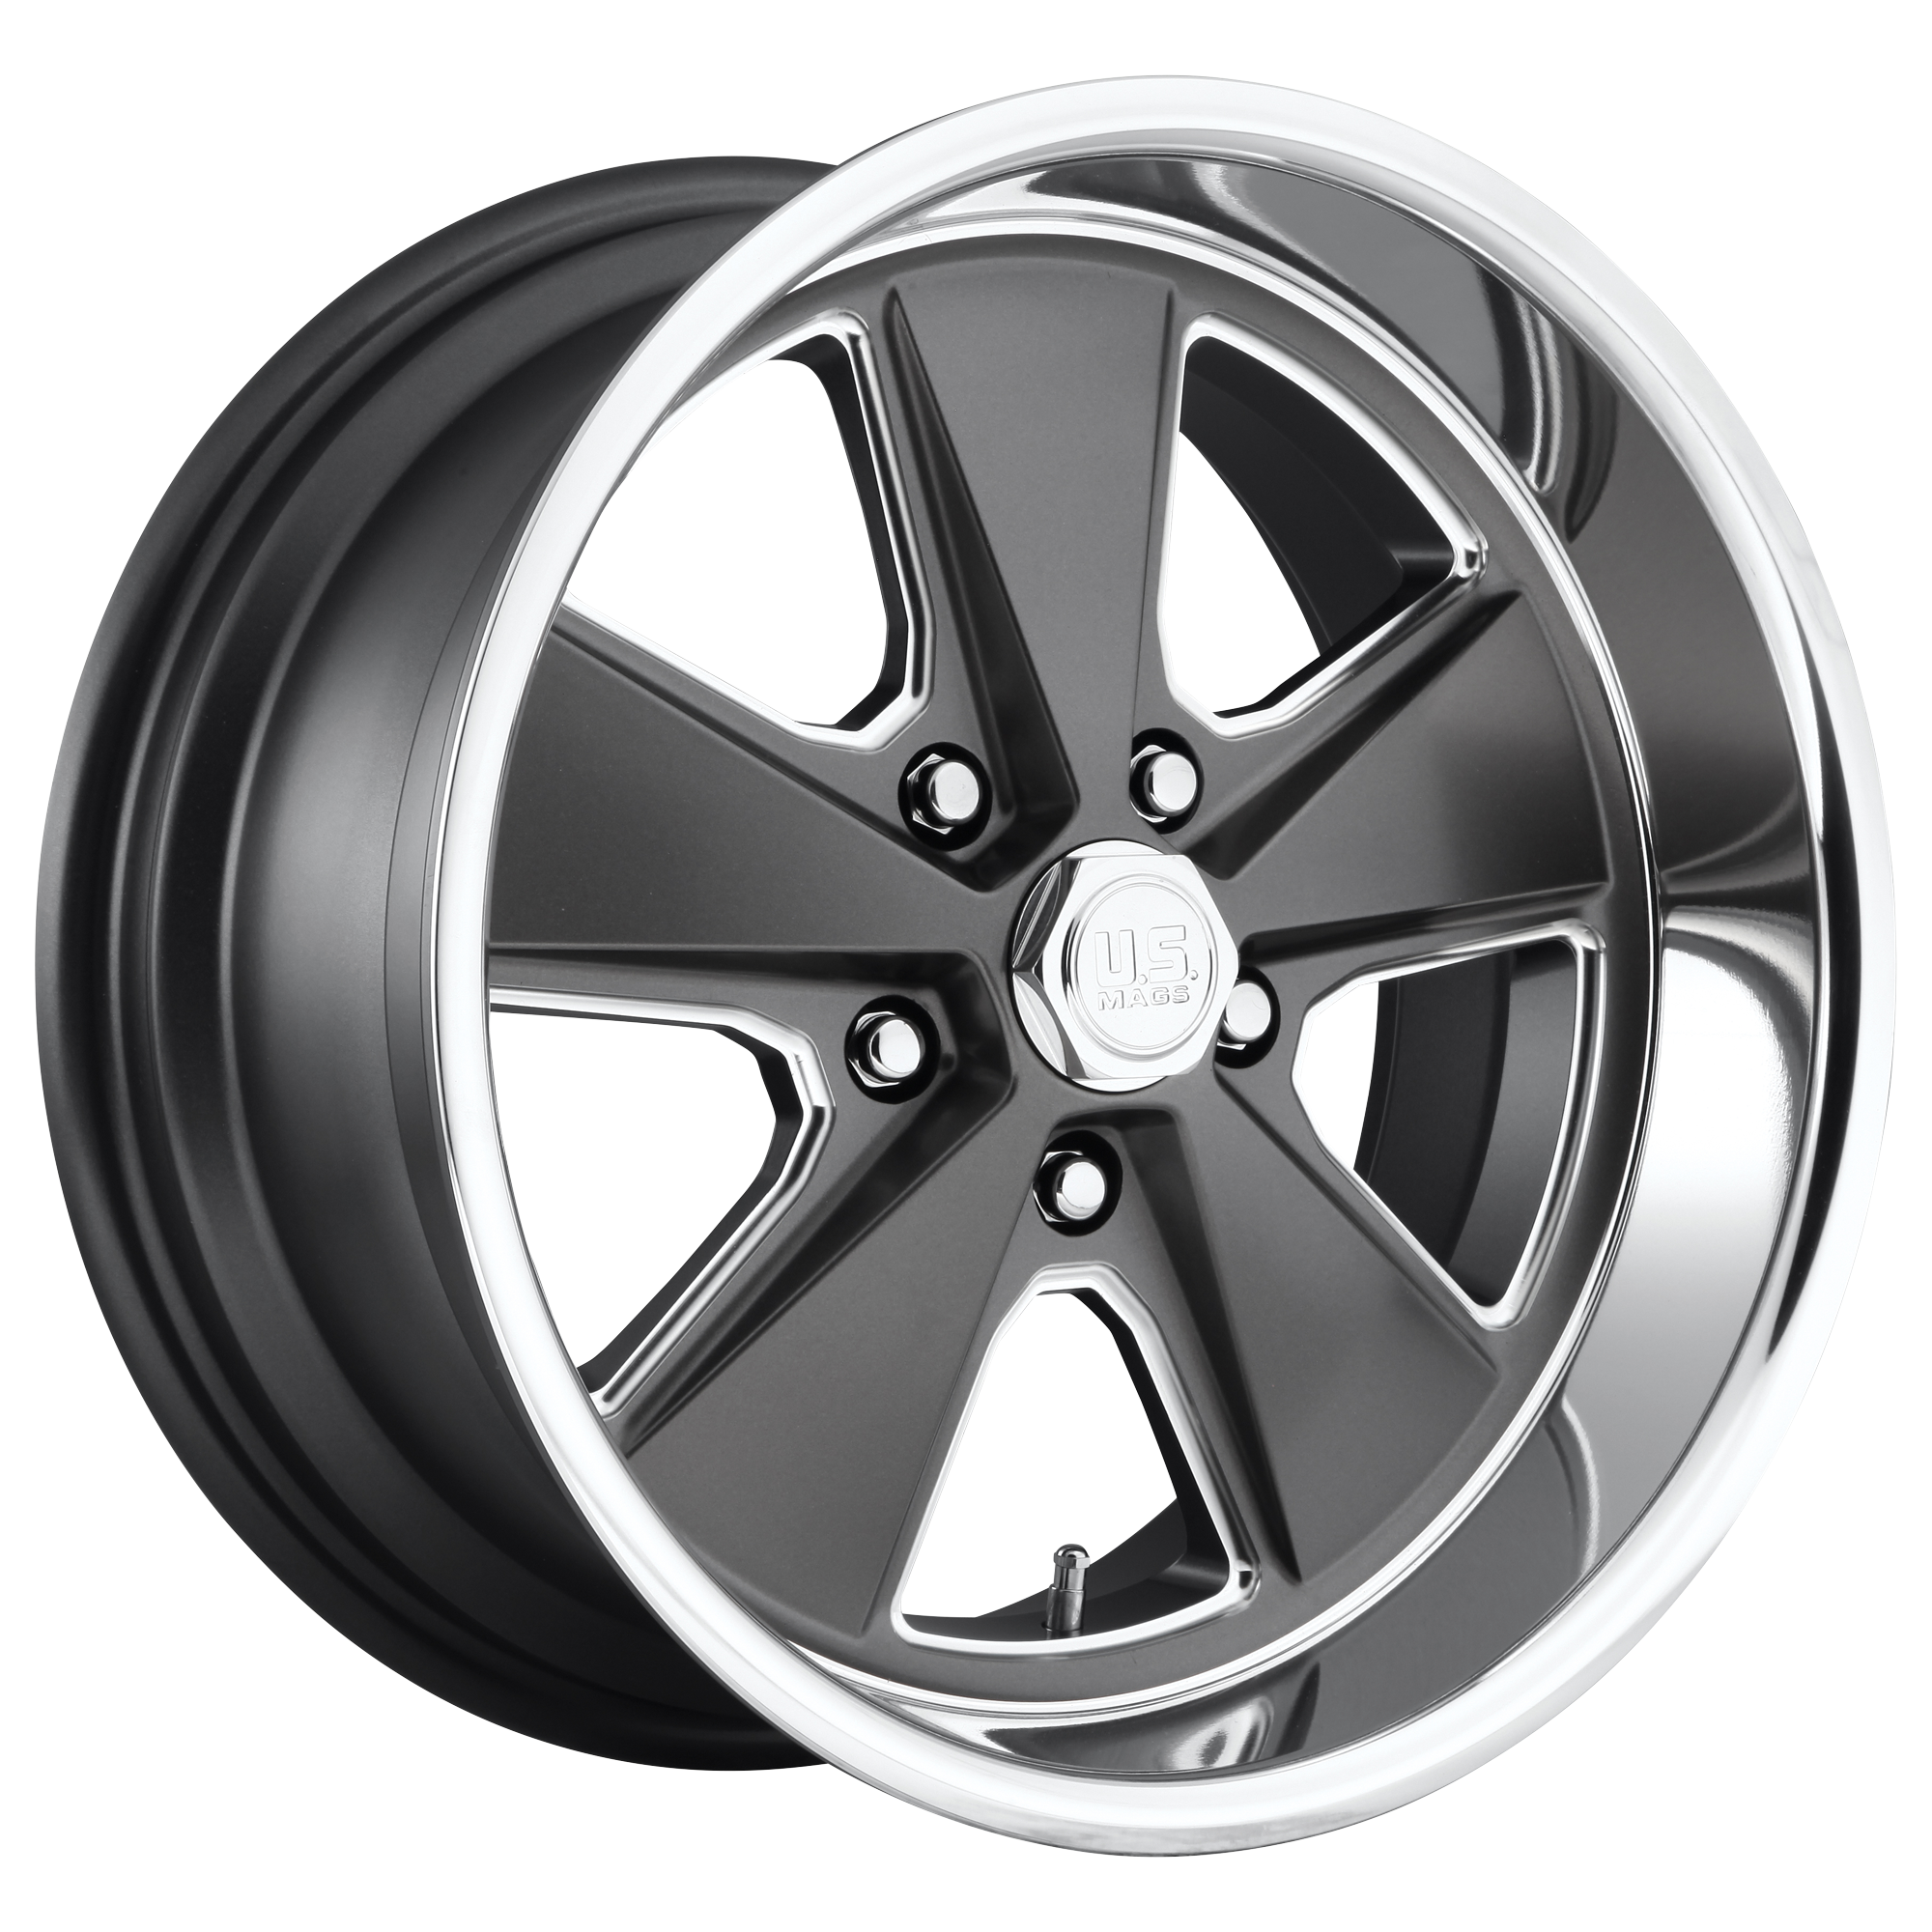 ROADSTER 20x9.5 5x120.65 MATTE GUN METAL MACHINED (1 mm) - Tires and Engine Performance